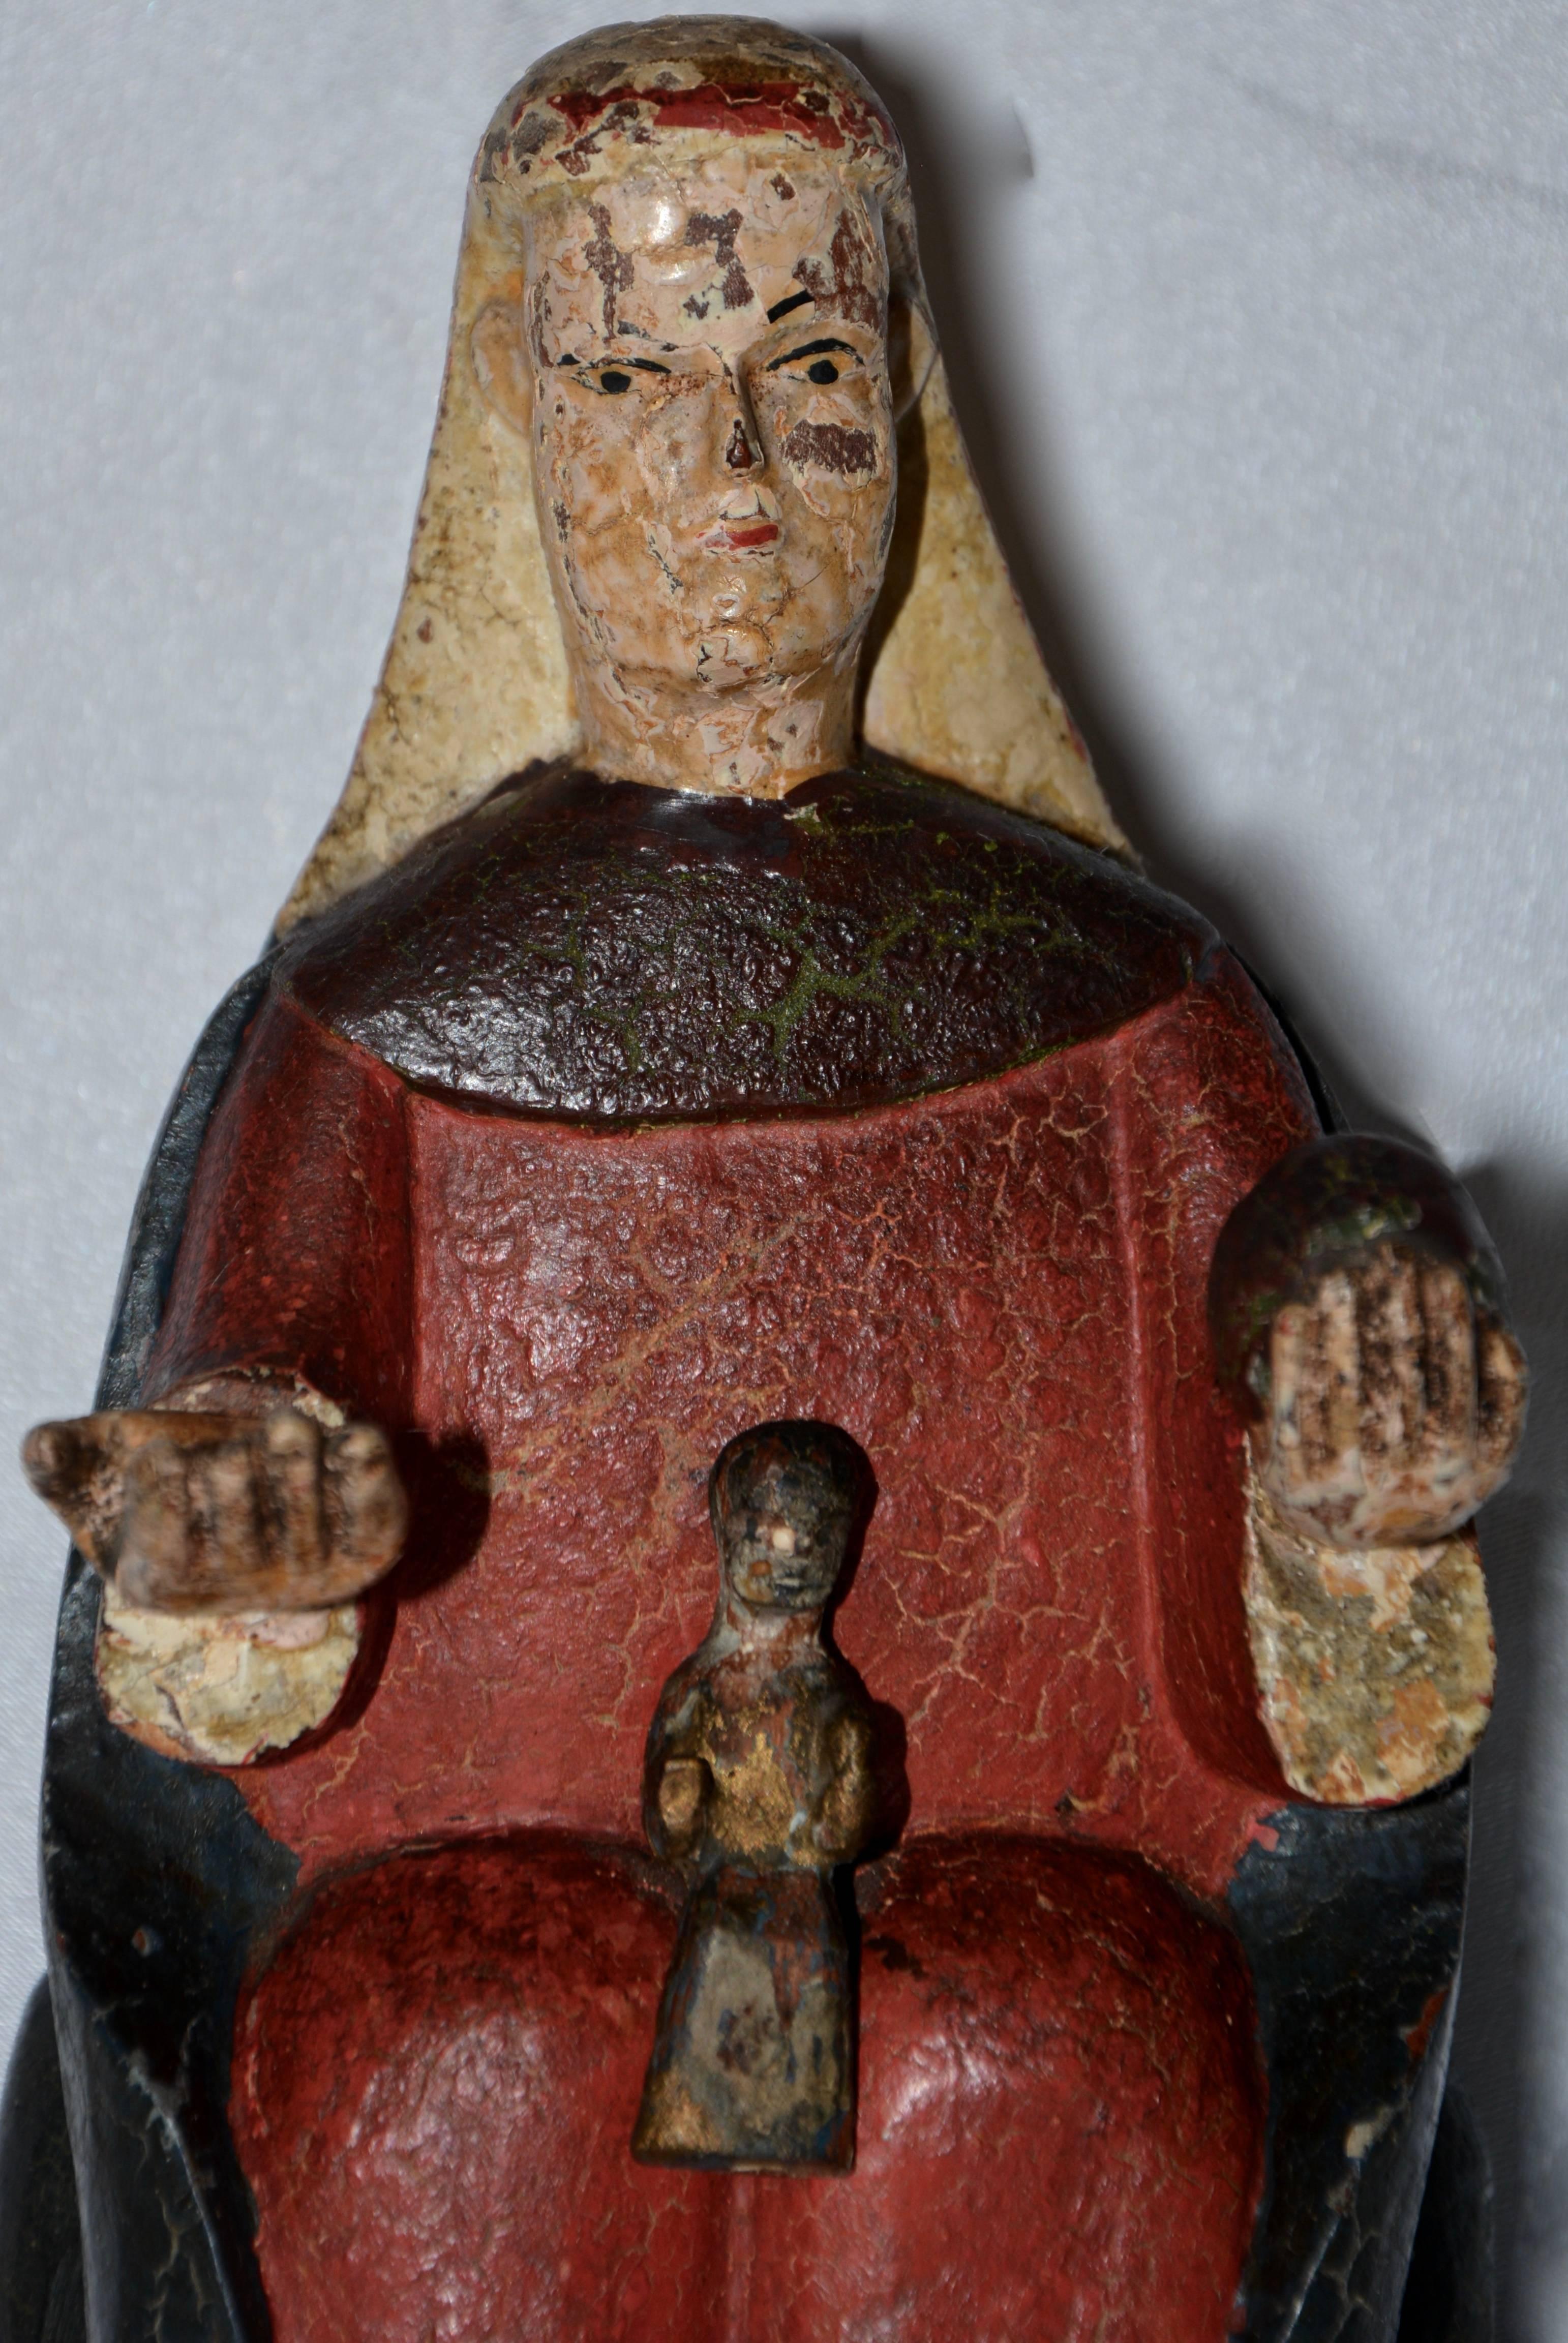 Featured is an antique hand carved polychromed Monserrat Virgin of Catalonia, Spain. The Virgin Mary is depicted seated, dressed in a red gown and dark robe, holding out an open right hand, and holding an orb of the Earth in the left. She has an